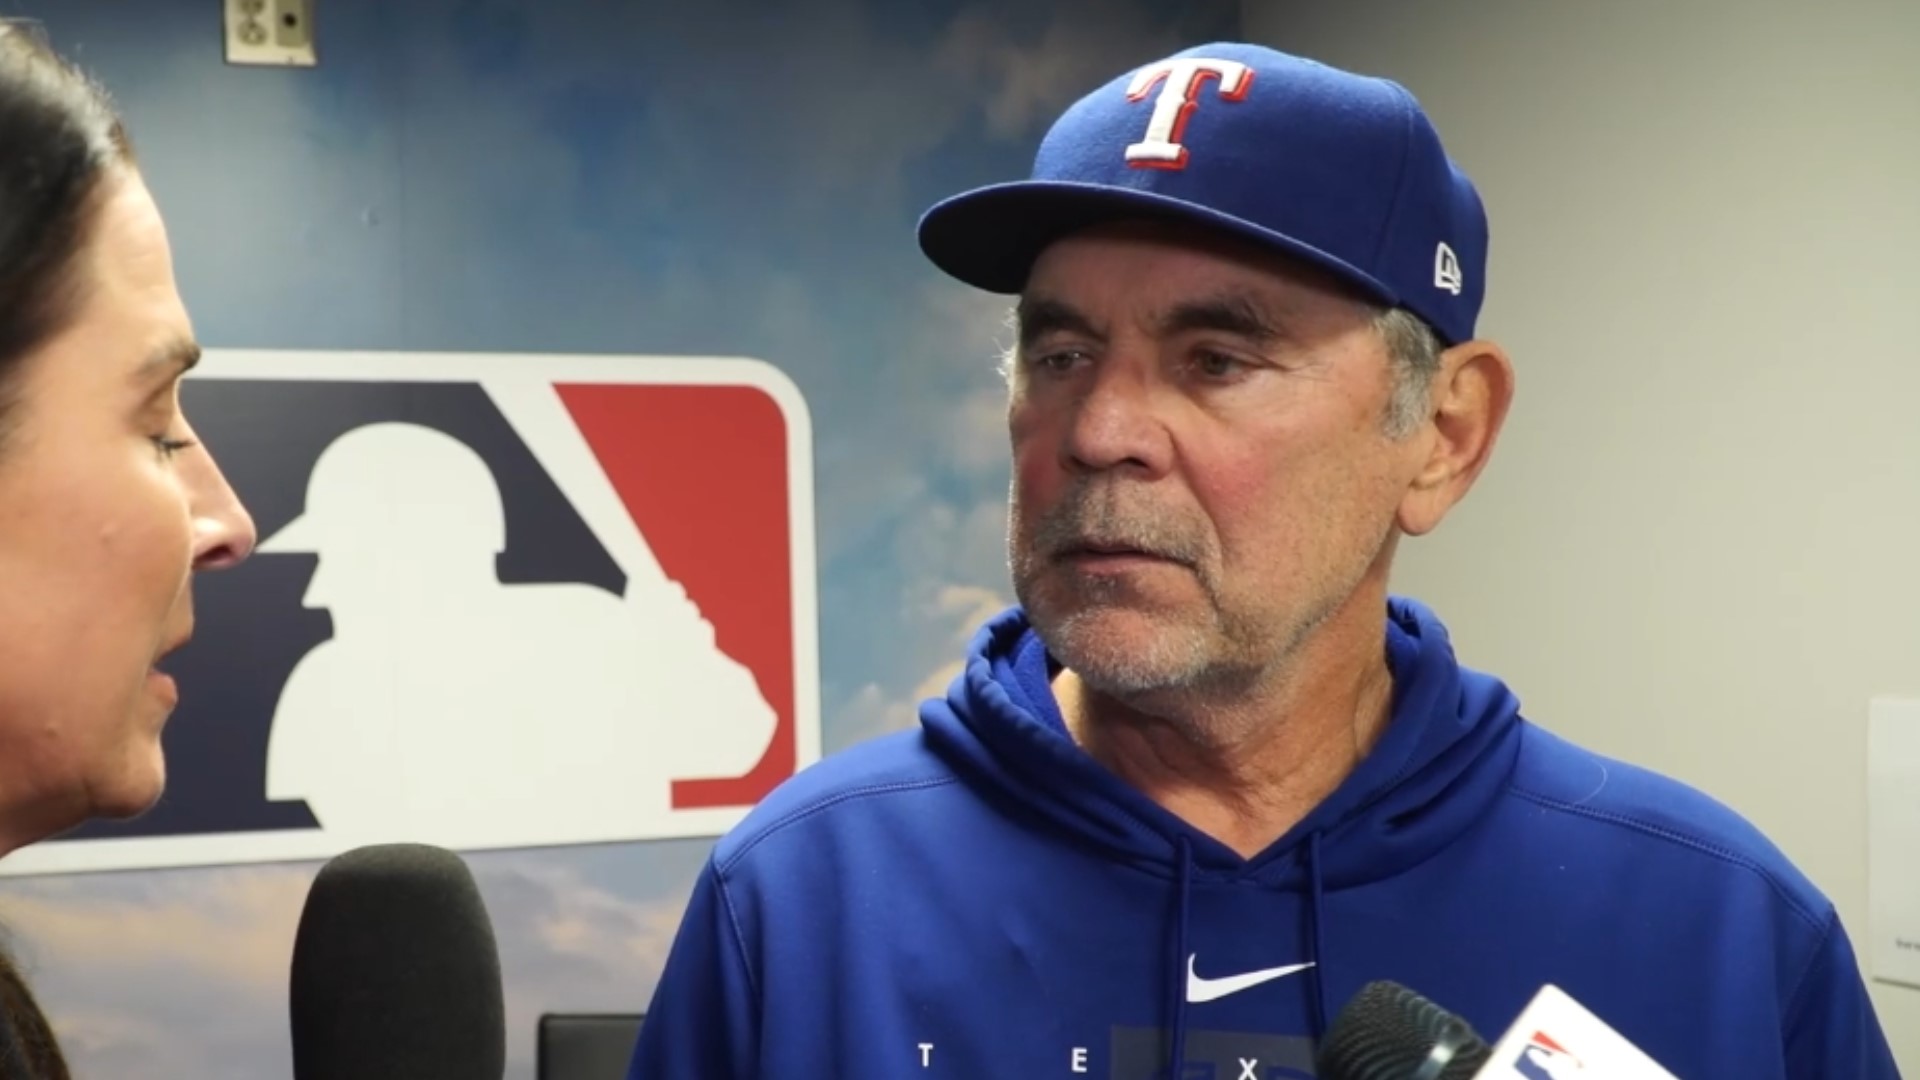 Texas Rangers manager Bruce Bochy explains why Evan Carter isn't starting  Game 2